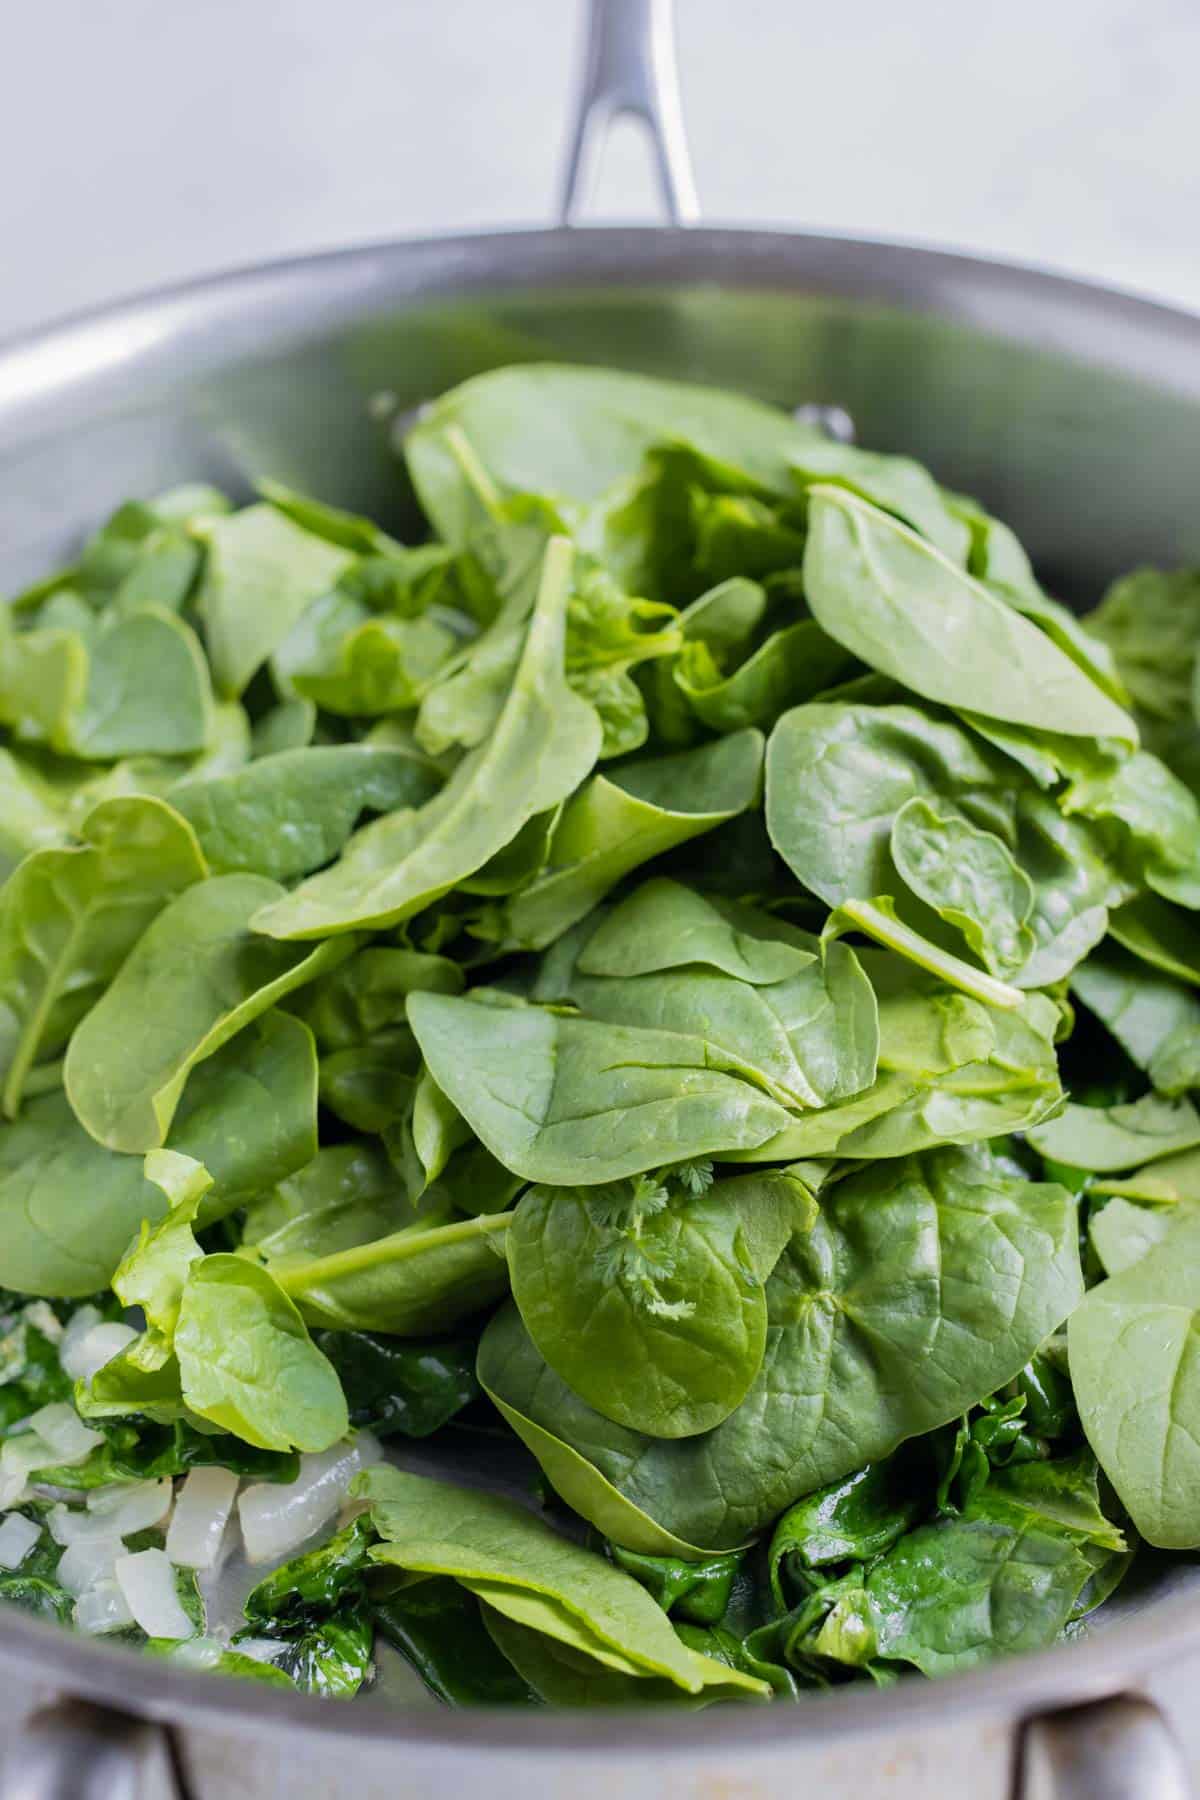 More fresh spinach is added to the pan.